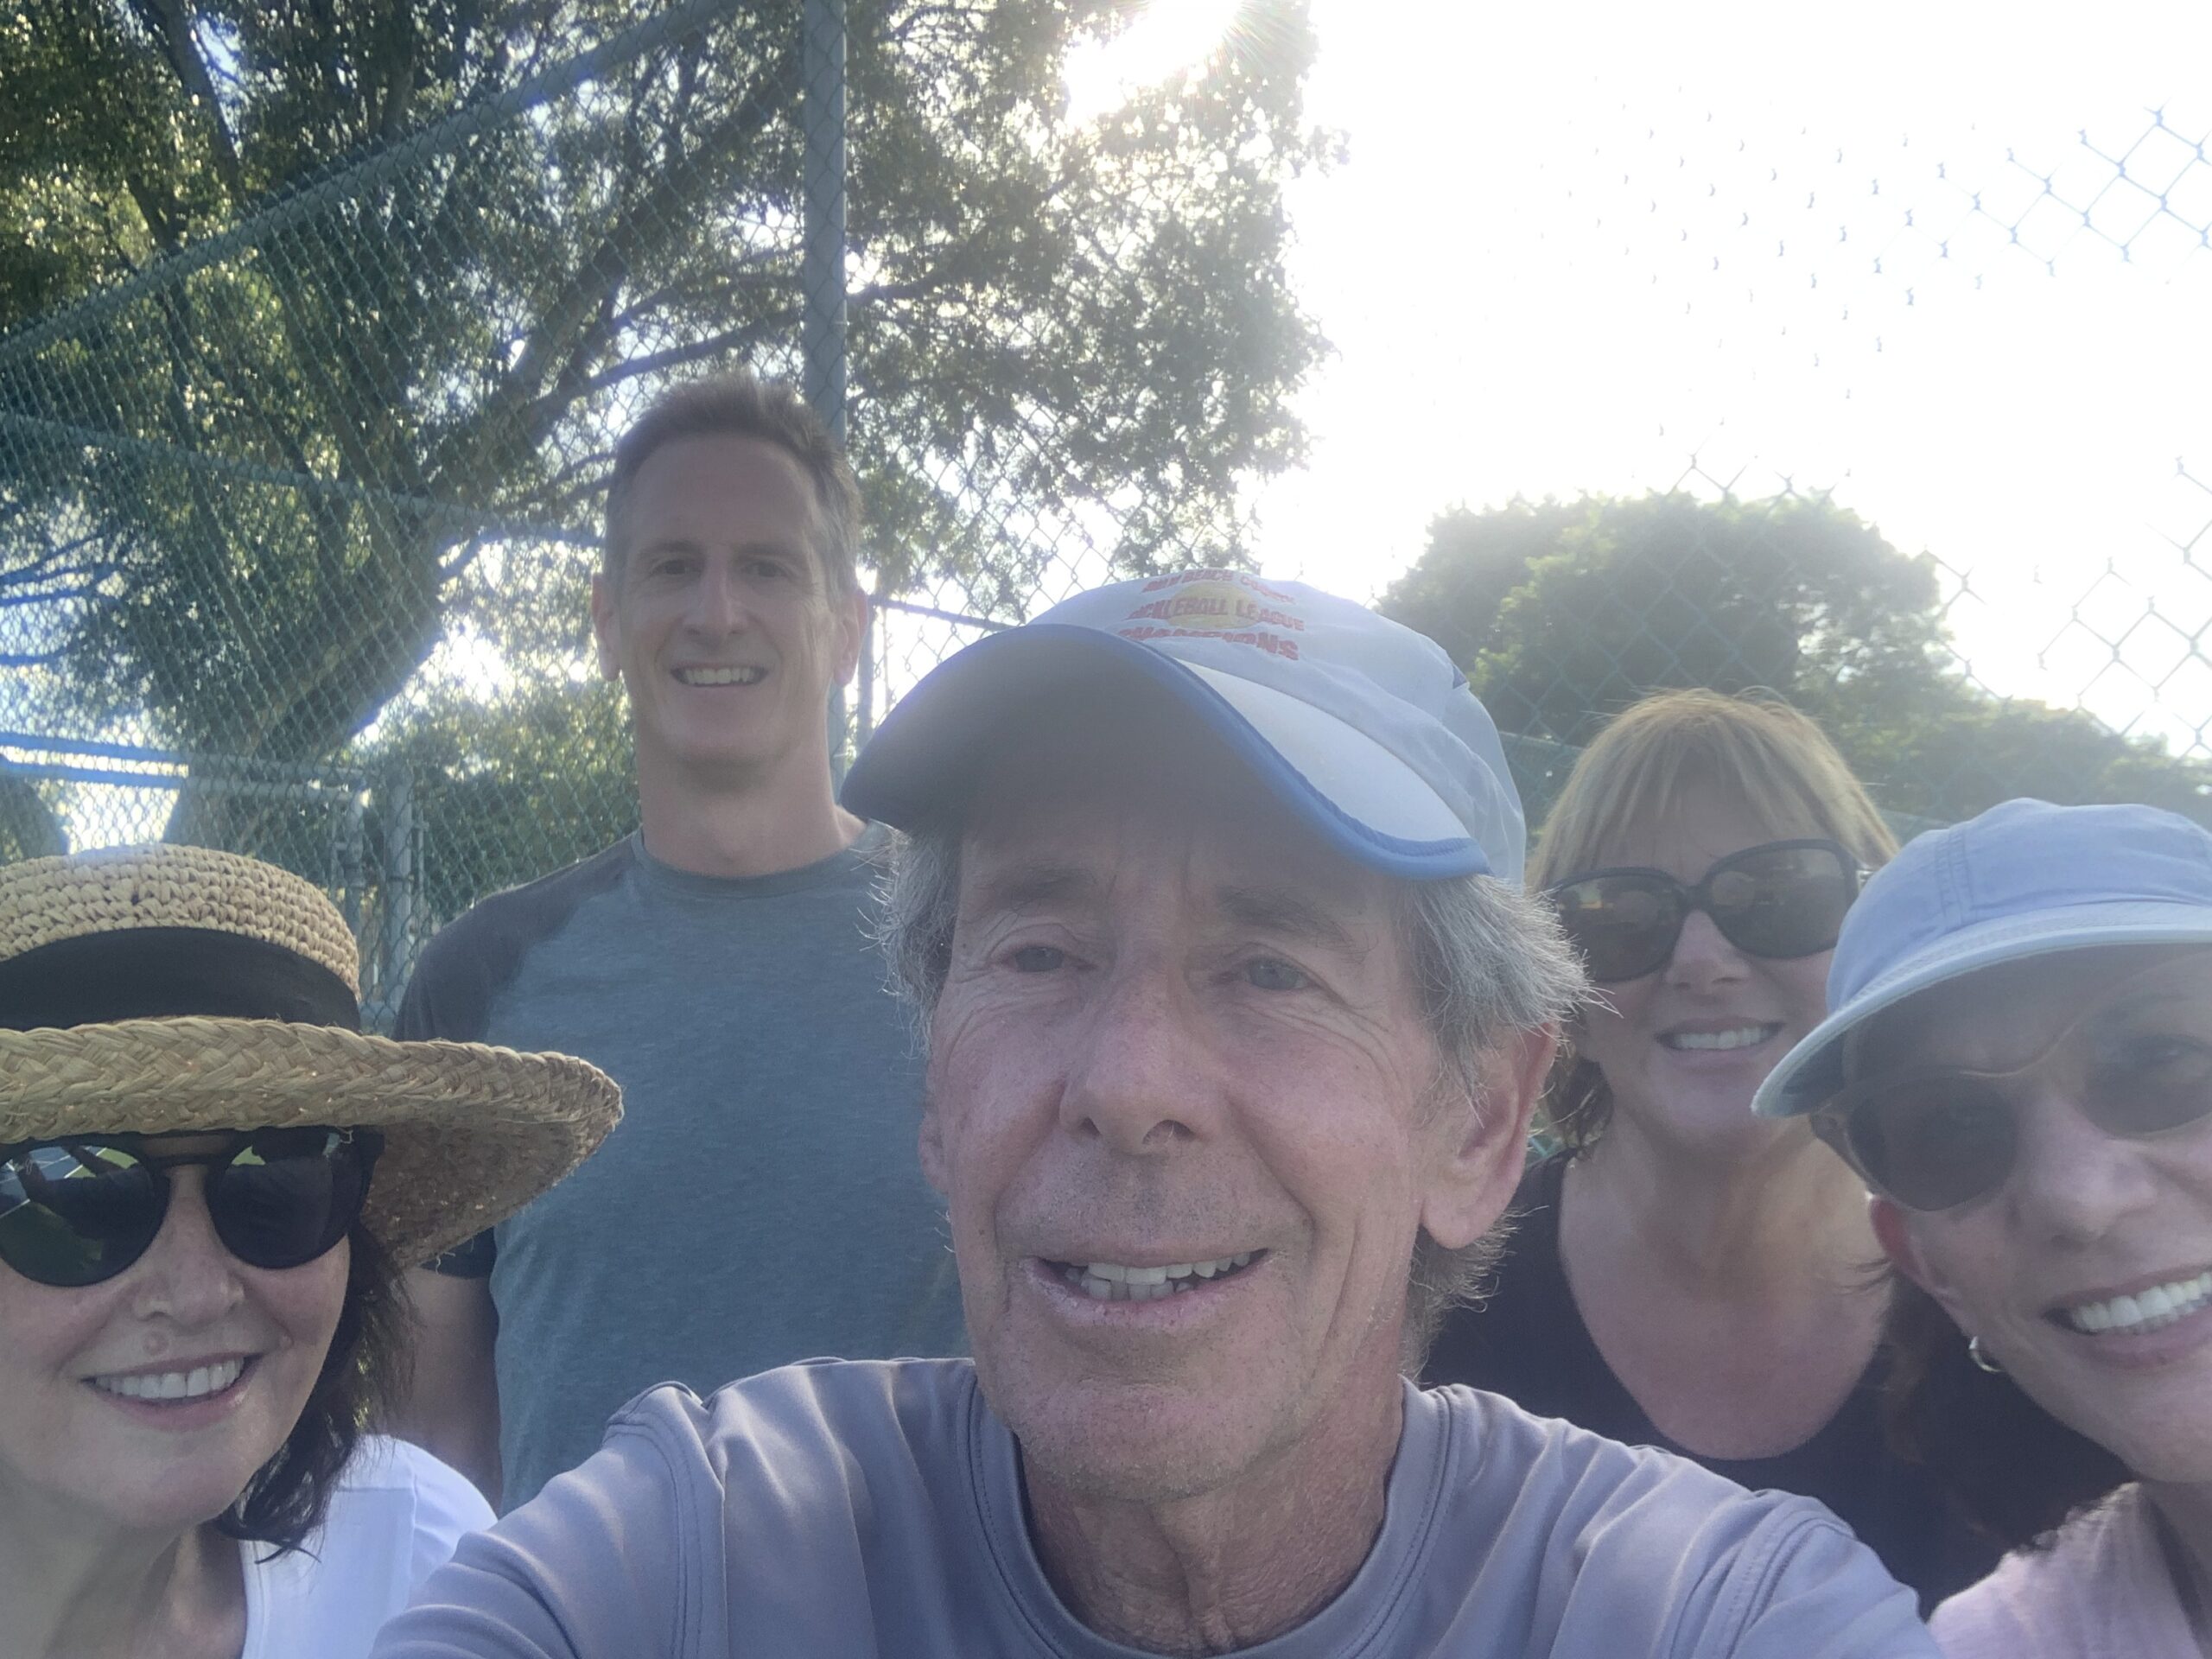 Bob with Diana, Gail, David, and Wendy after an Intermediate Pickleball Clinic in Delray Beach, FL